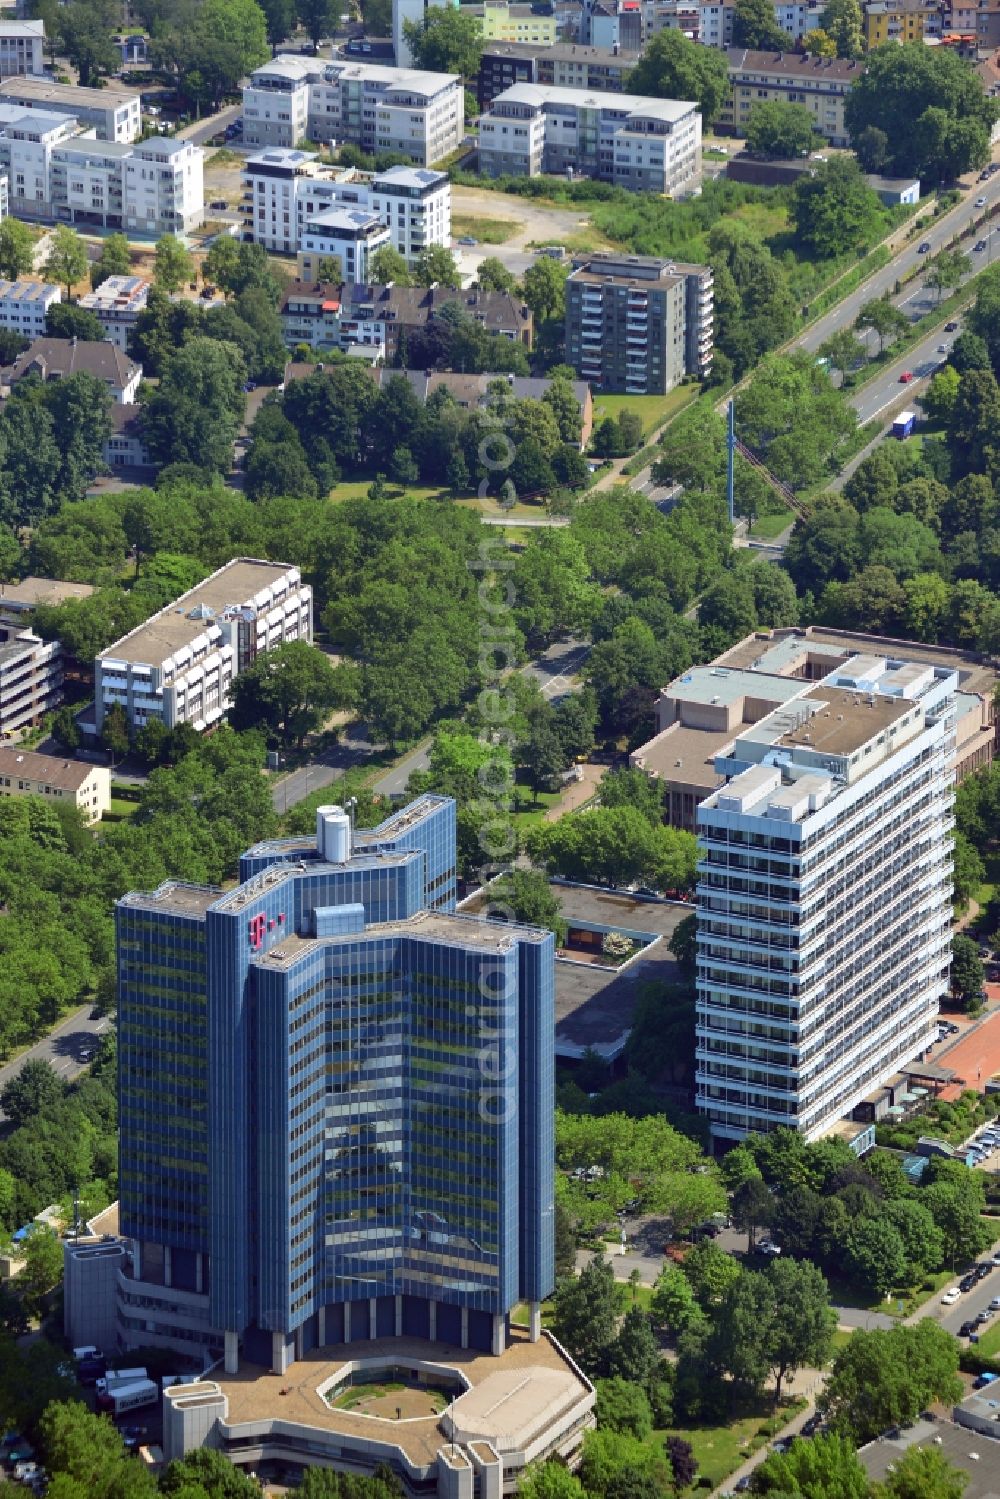 Dortmund from the bird's eye view: The Telekom Tower at the Rheinlanddamm in Dortmund in the state of Nordrhein-Westphalia. The office complex at the Westphalia Park was the tallest building in Dortmund until 2006. Originally built for the directorate of mail services, it is now headquarters for RWE distribution network provider Westnetz